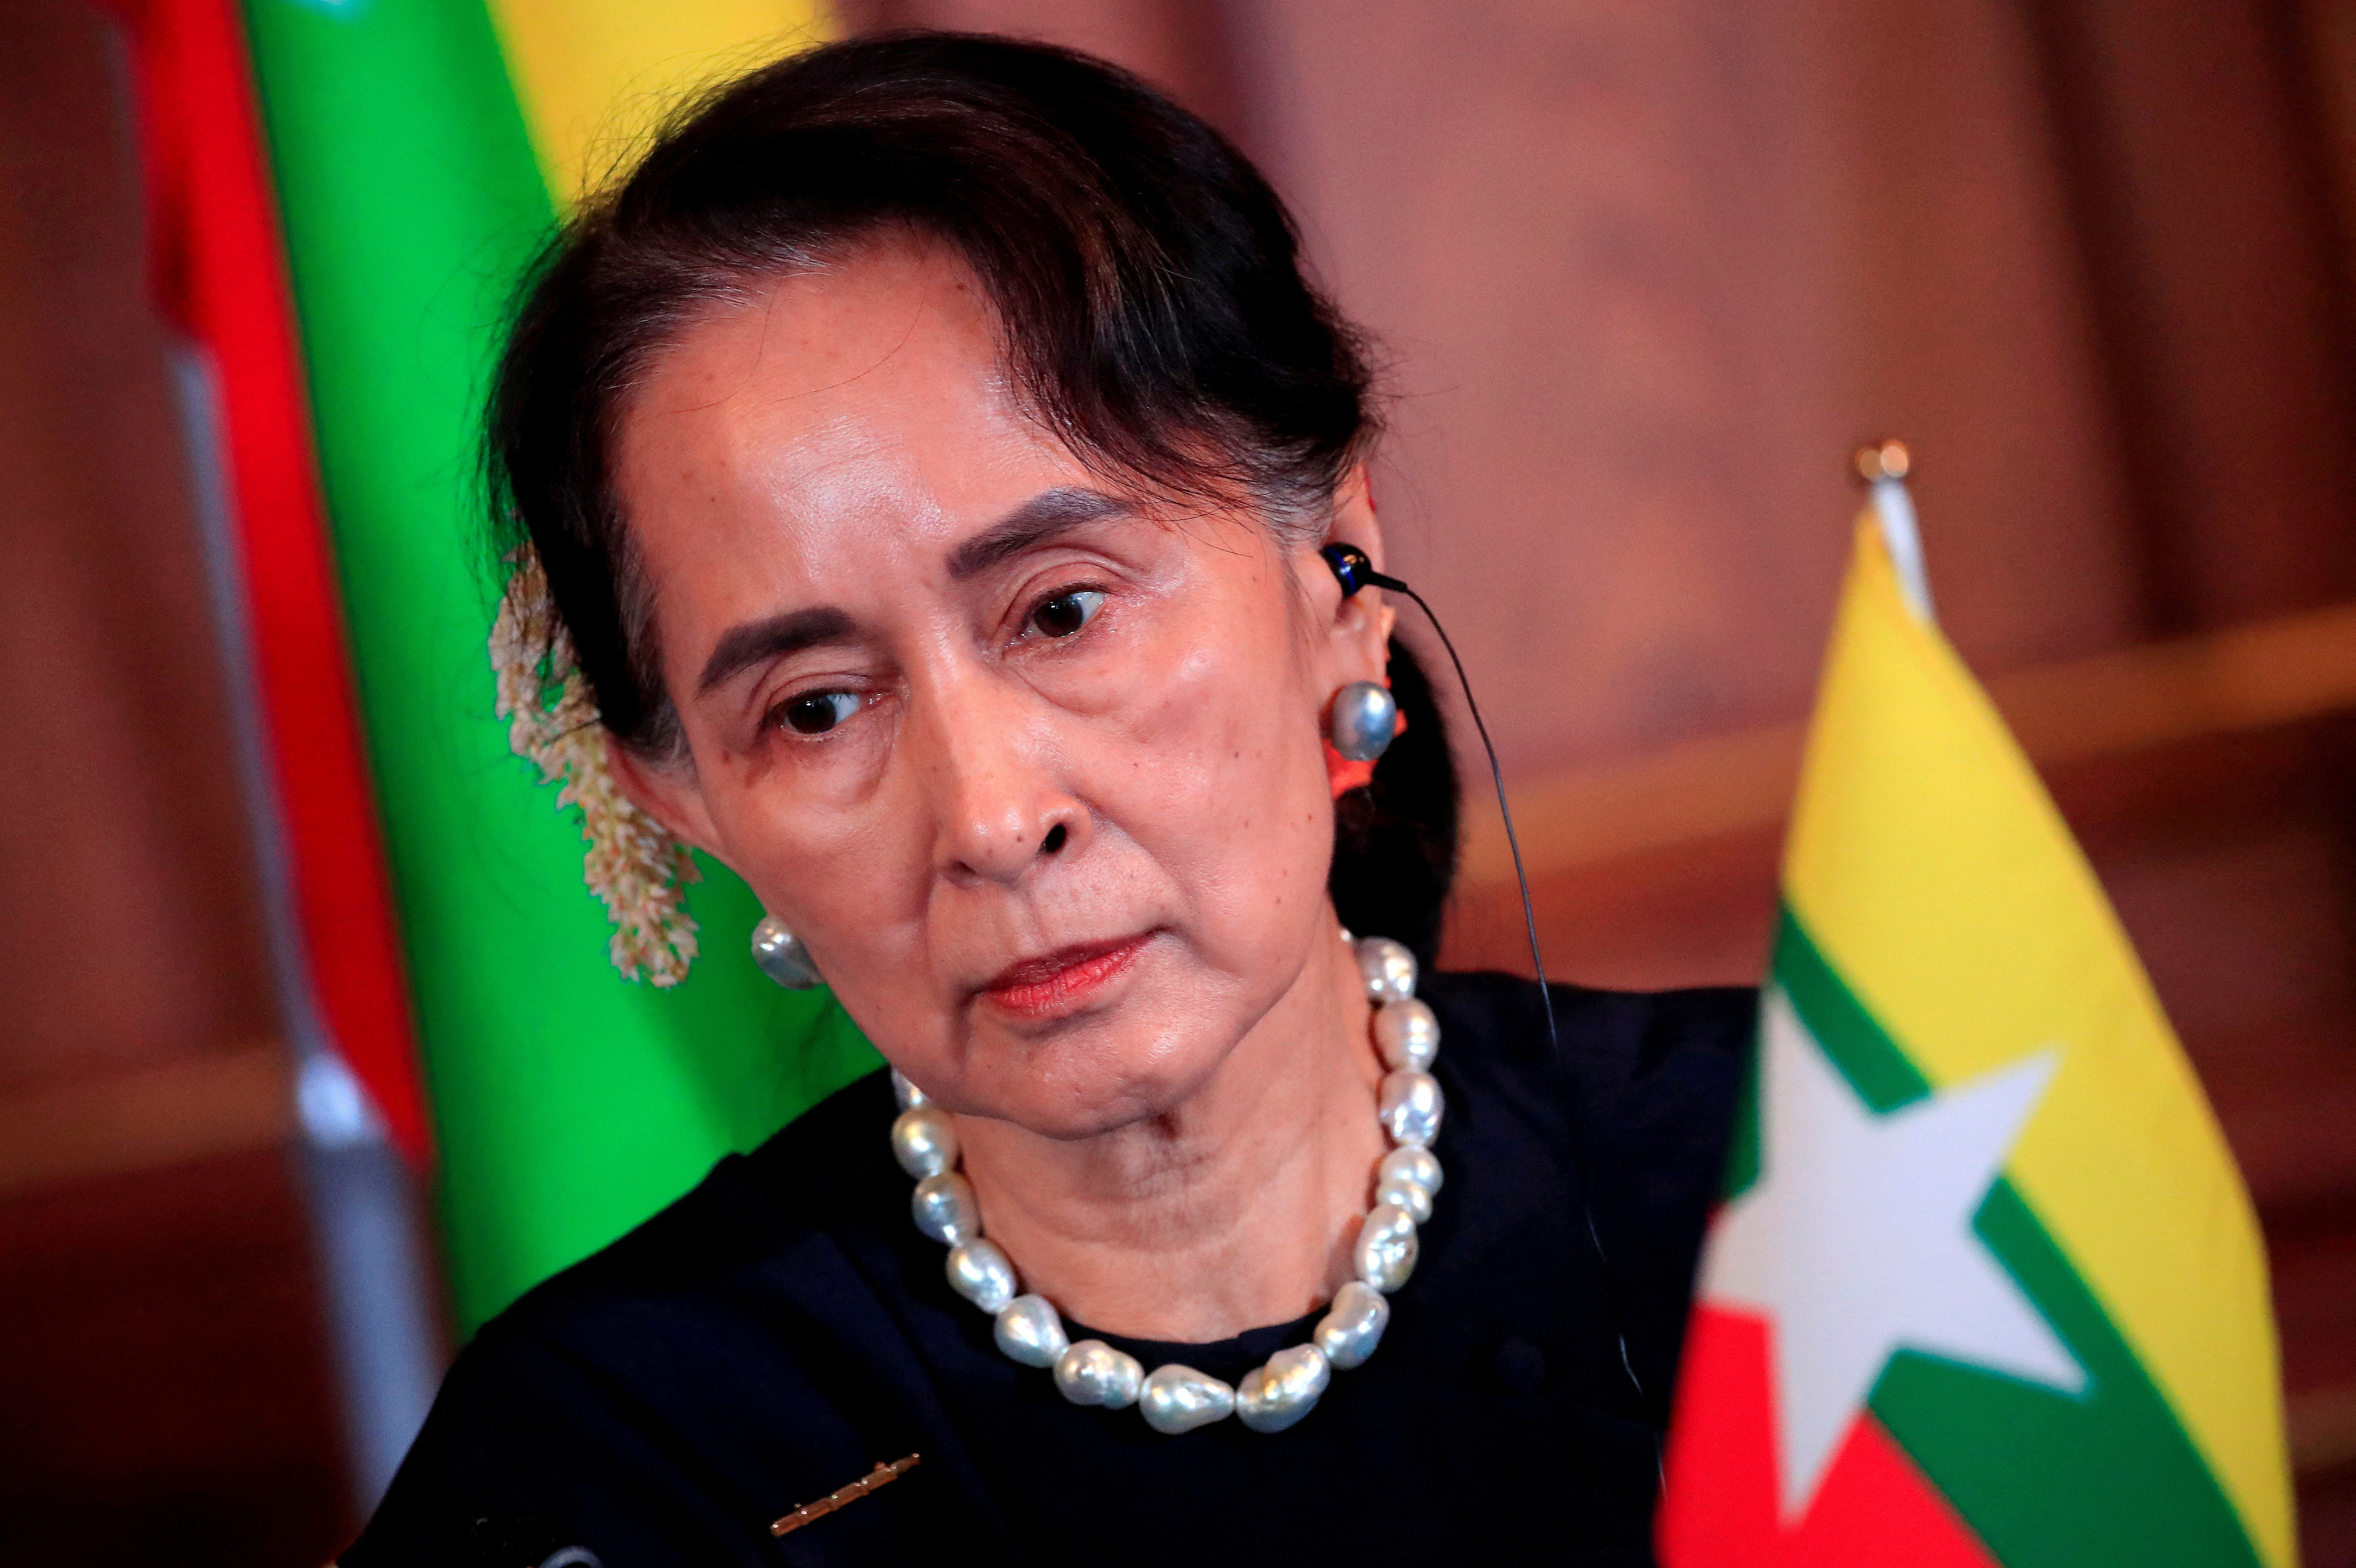 Myanmar's State Counsellor Aung San Suu Kyi attends the joint news conference of the Japan-Mekong Summit Meeting in Tokyo